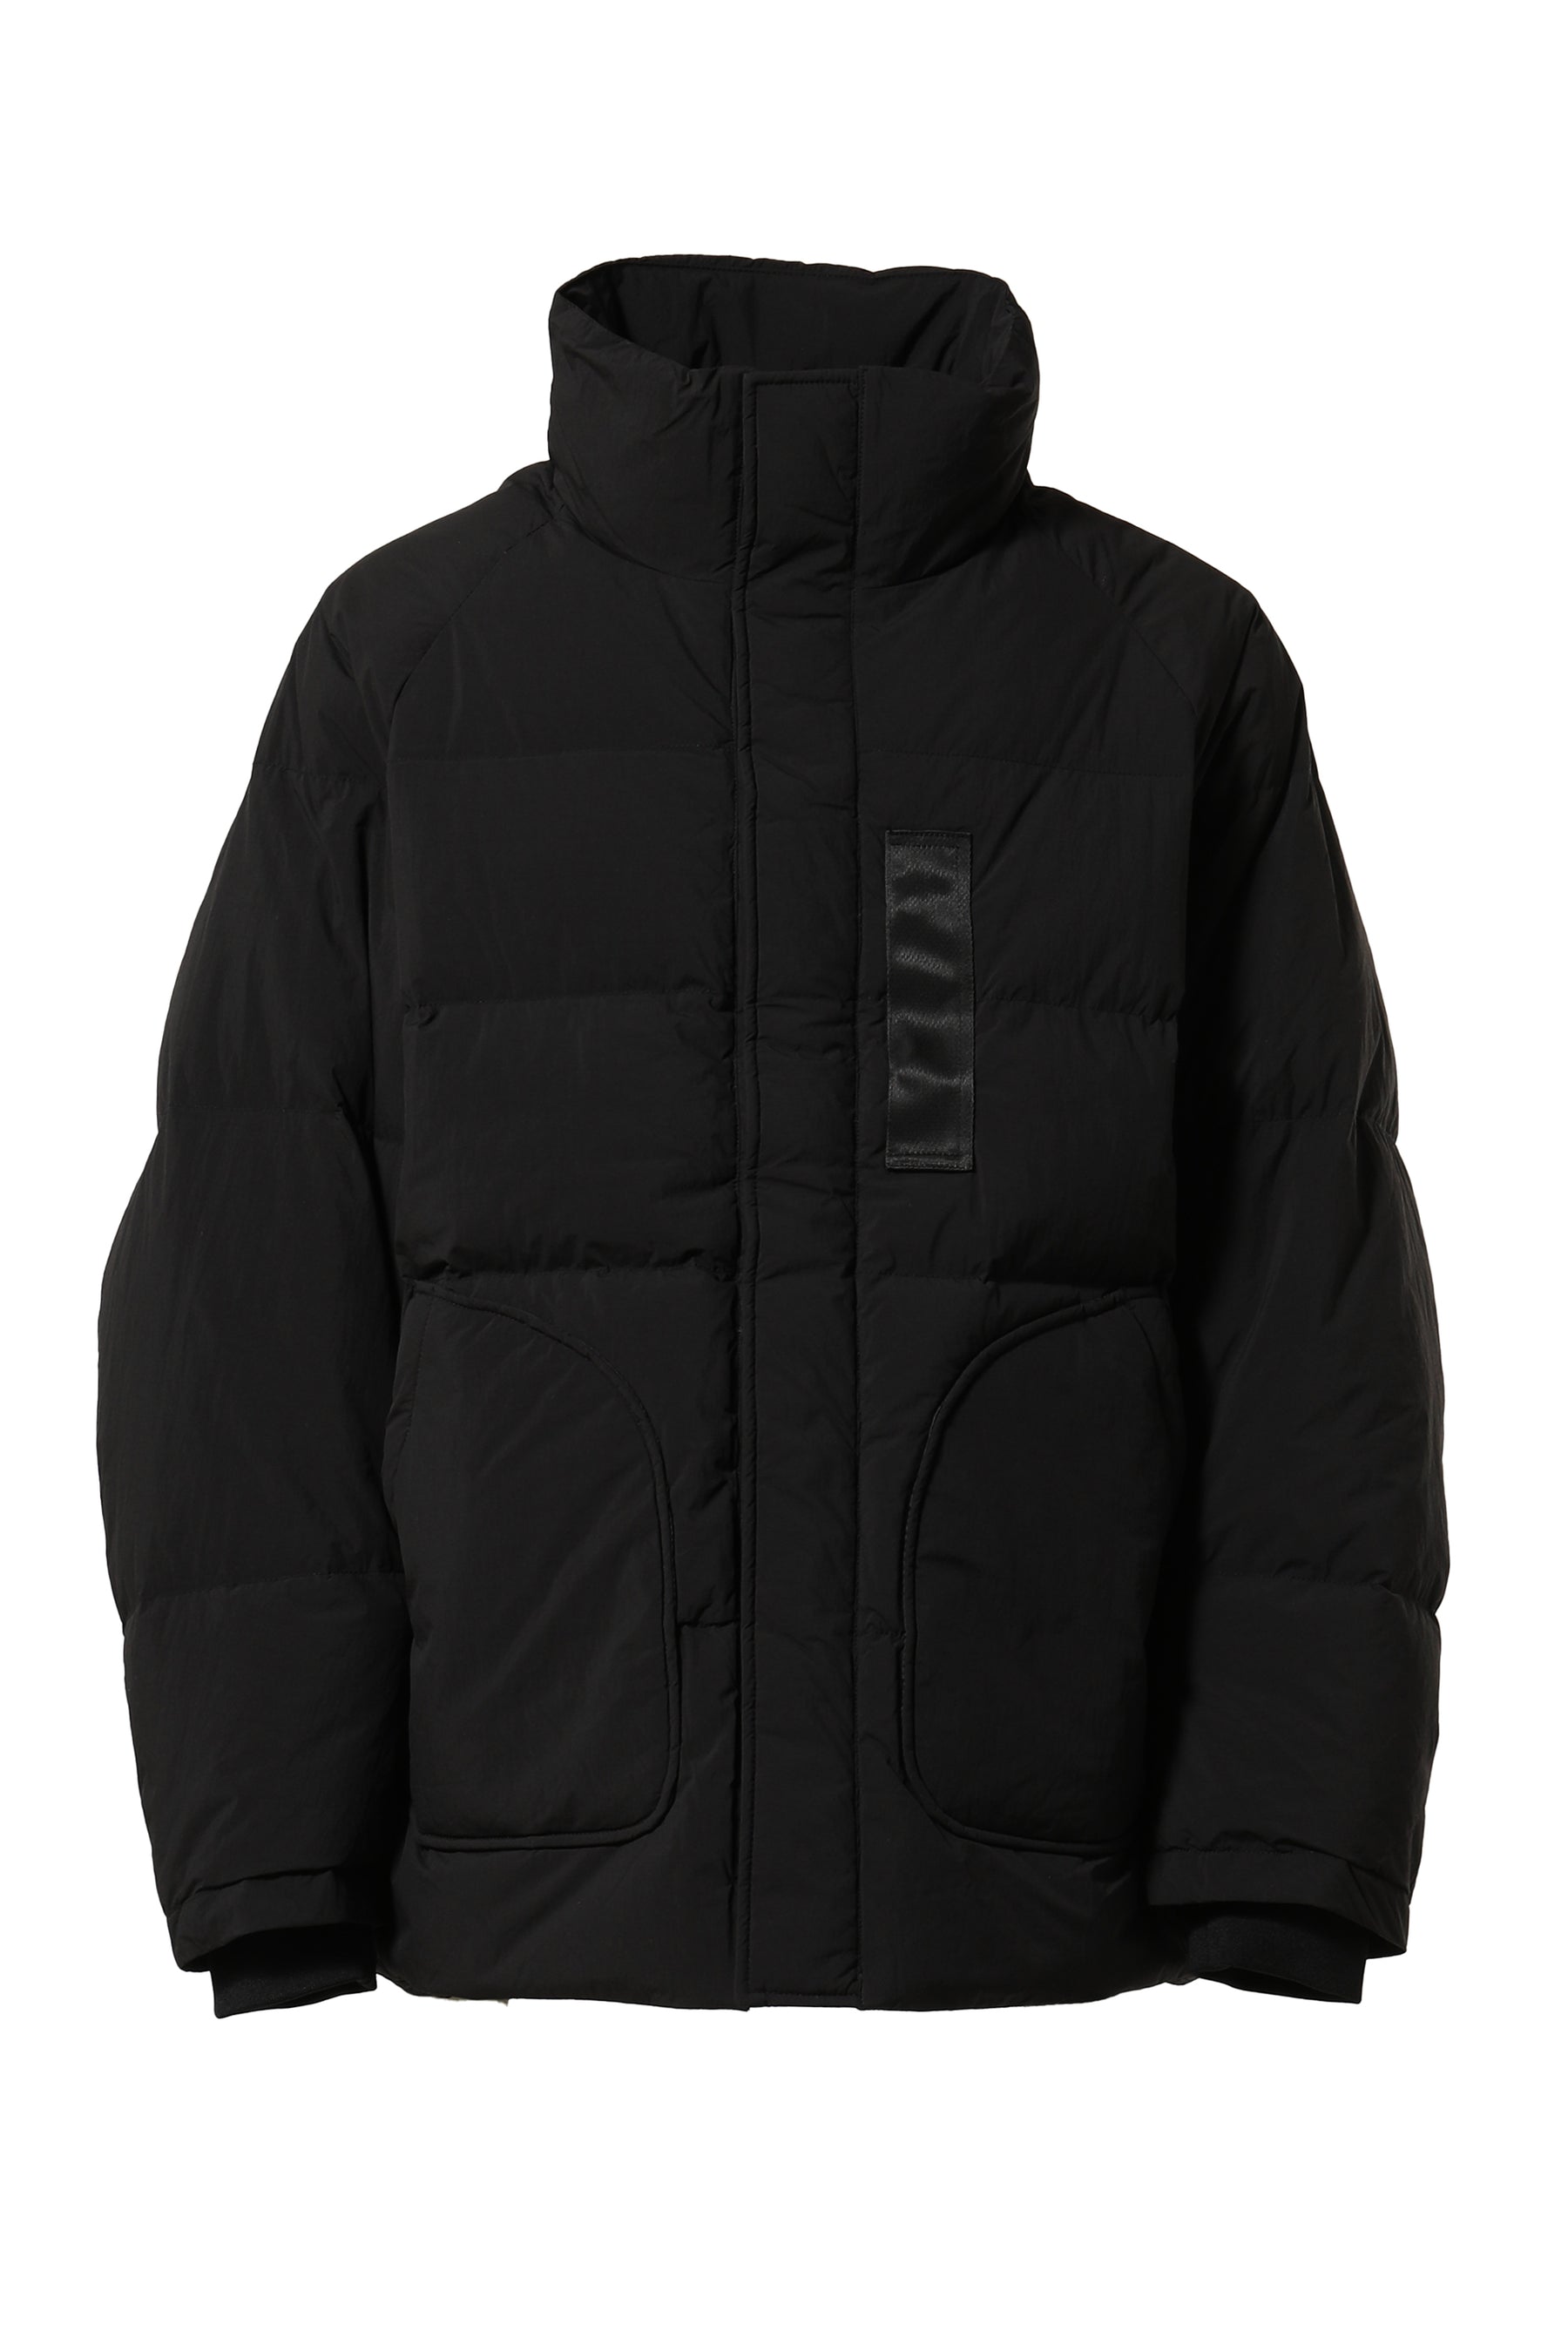 White Mountaineering × TAION ホワイトマウンテニアリング × タイオン ...